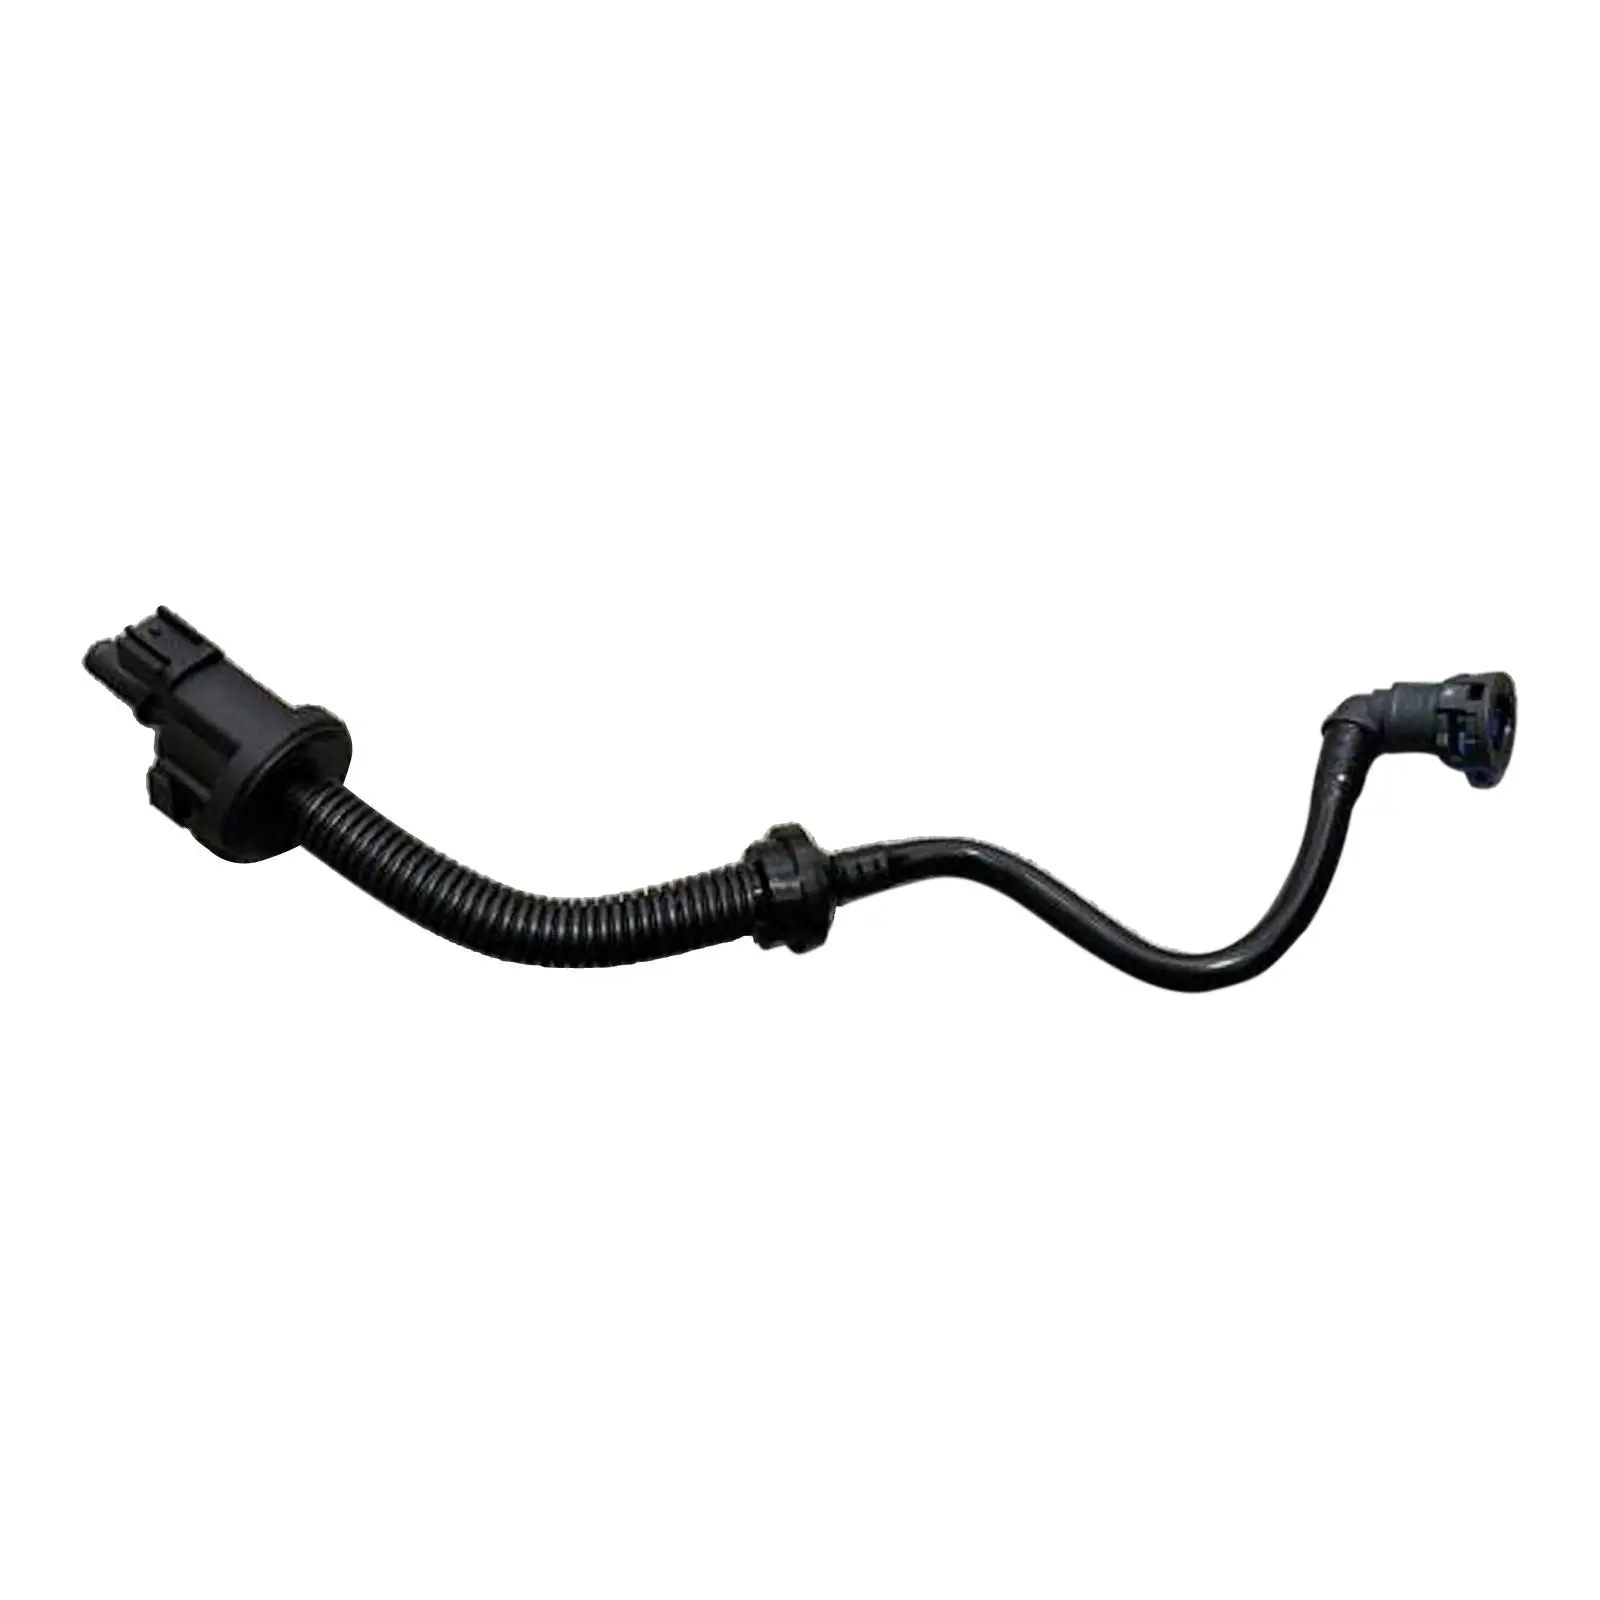 Car Fuel Vapour Hose for Ford Mustang 2-Door 2.3 Ecoboost 2015-2019